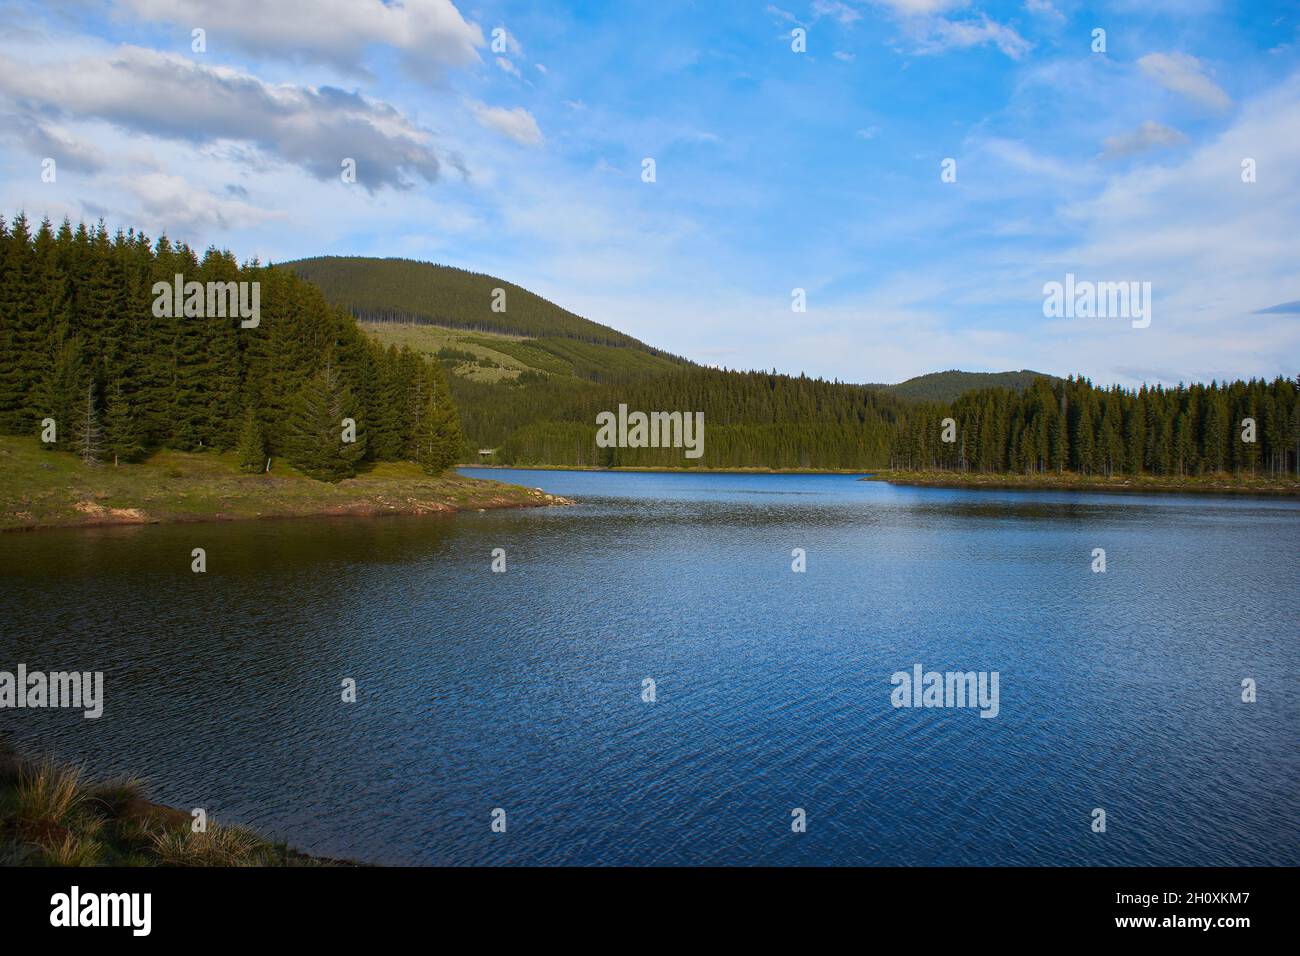 A view over the Lake Oasa in Mountains Sureanu with sky with clouds and forest Stock Photo